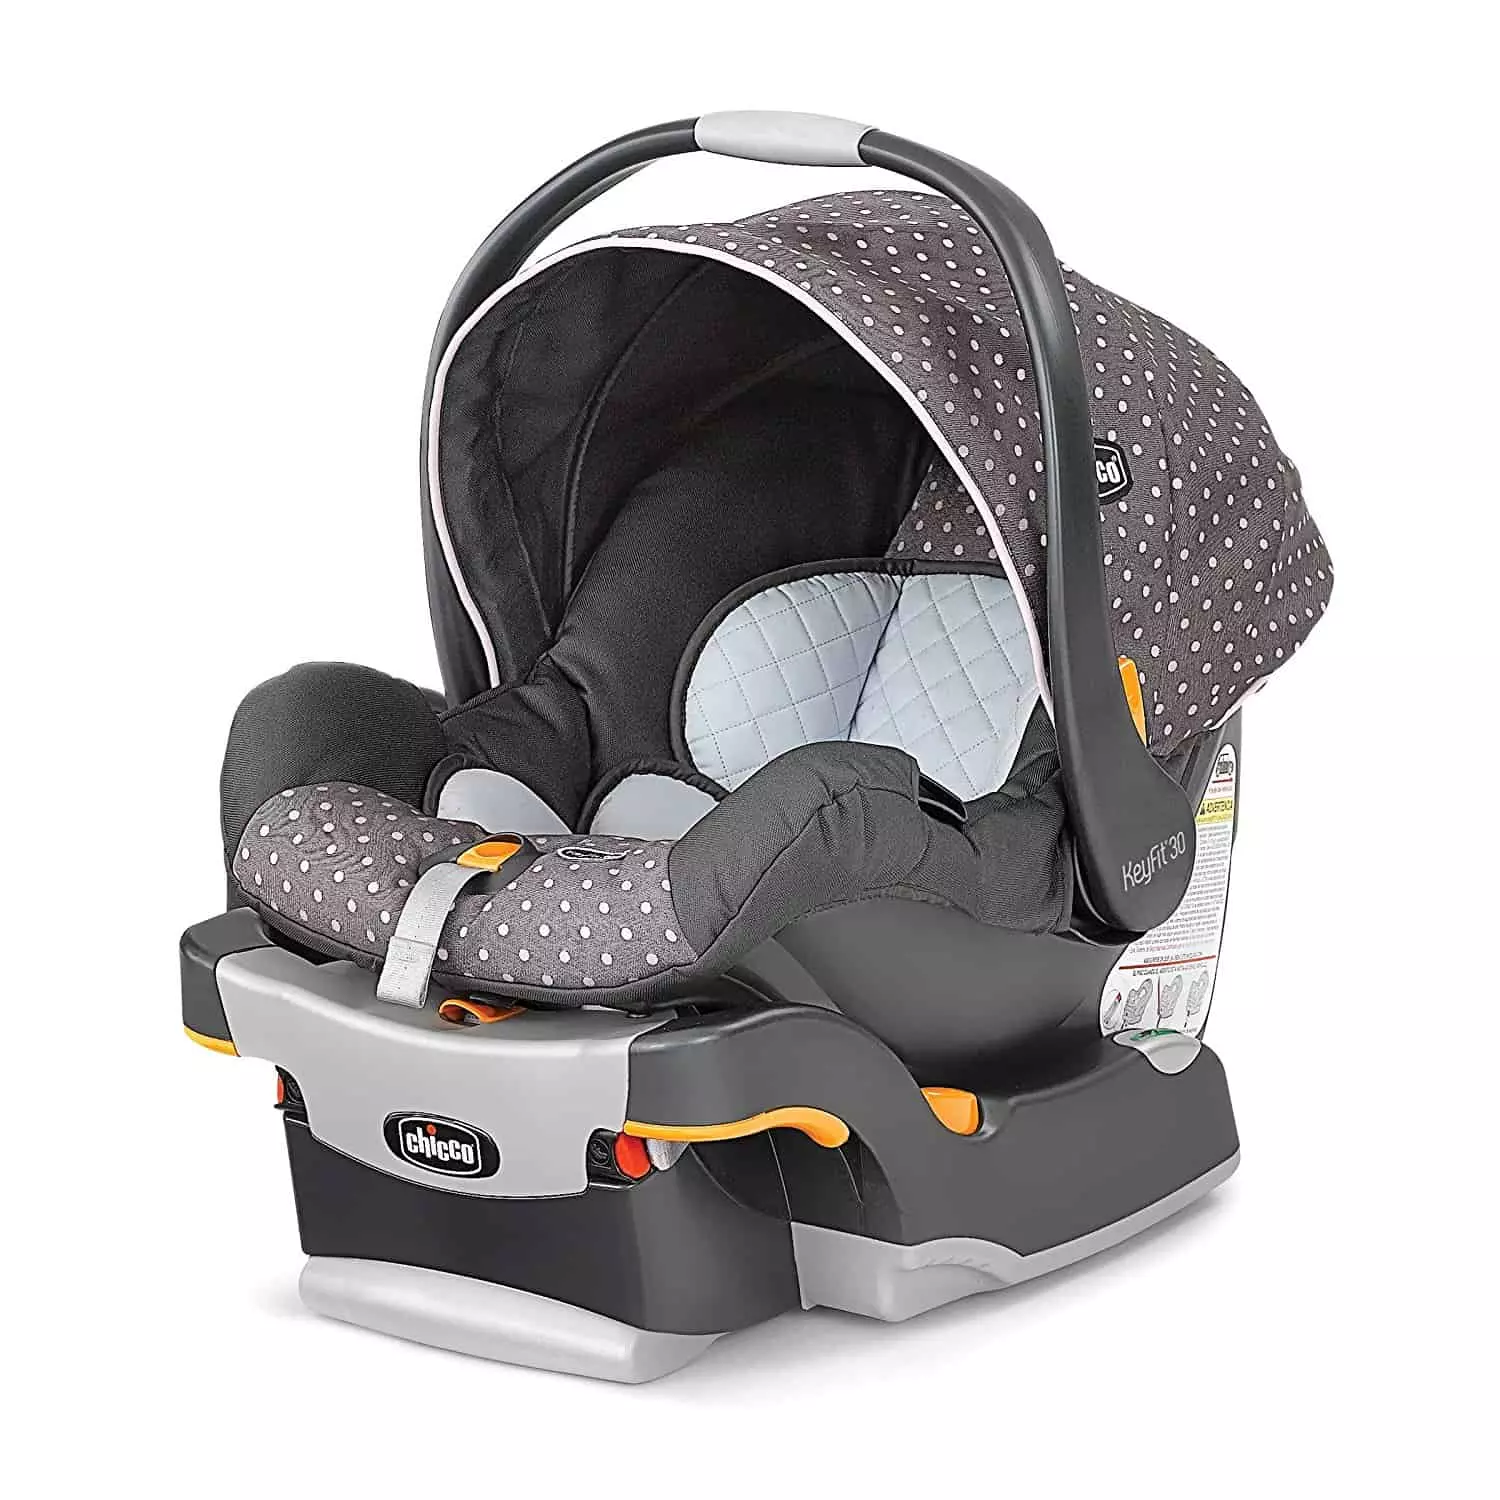 The Best Infant Car Seat Y Baby Bargains - What Is The Safest Infant Car Seat 2021